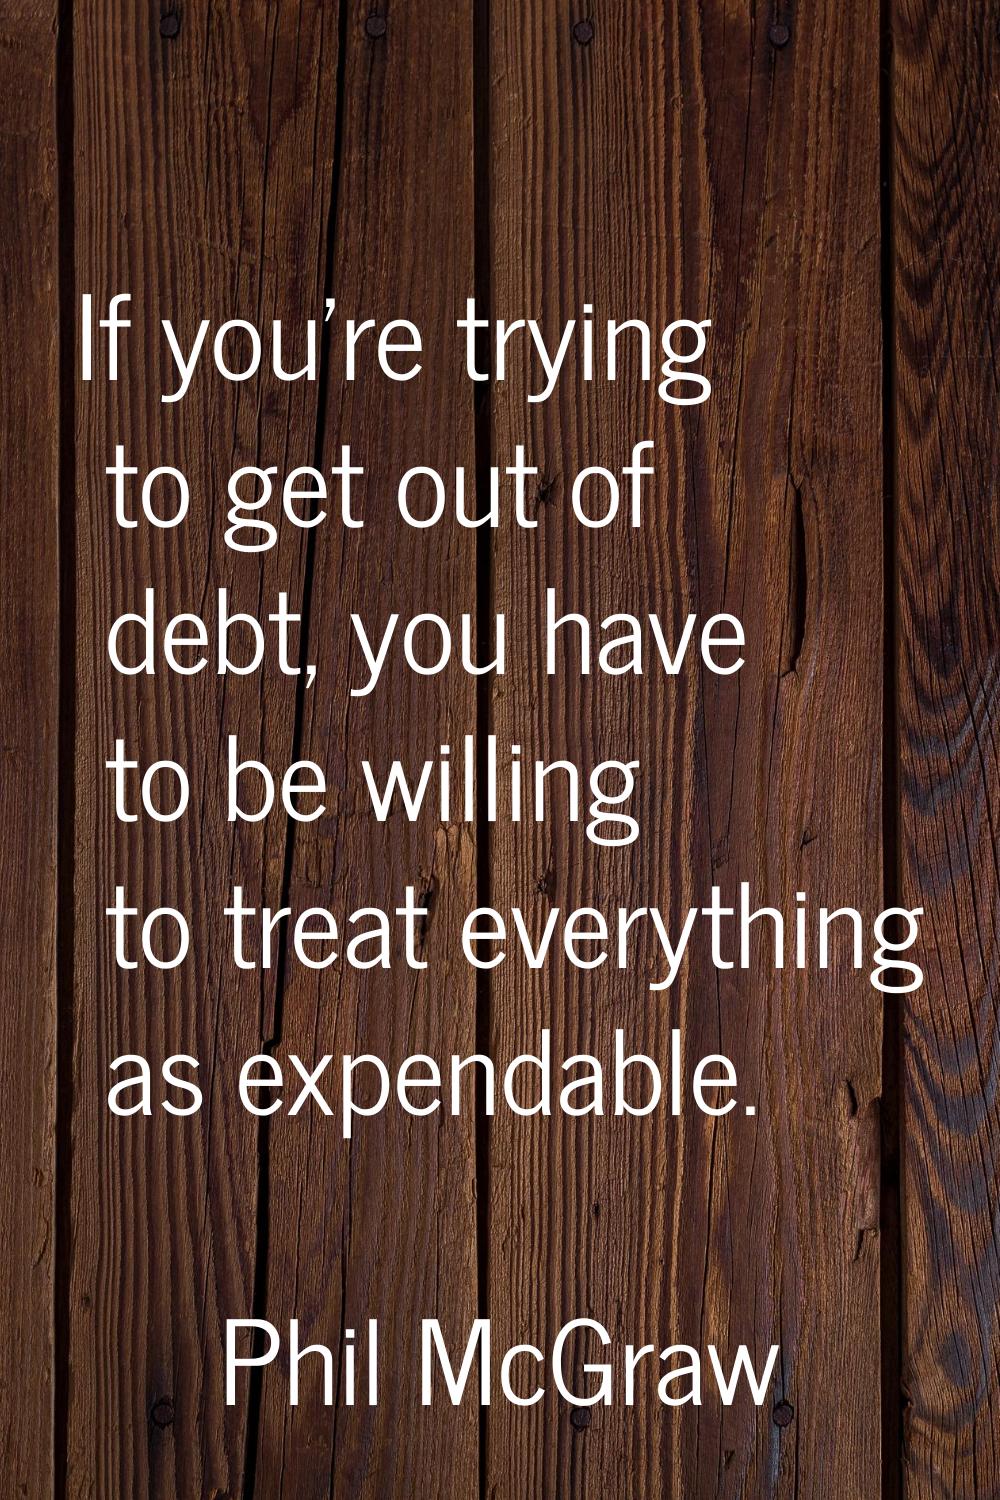 If you're trying to get out of debt, you have to be willing to treat everything as expendable.